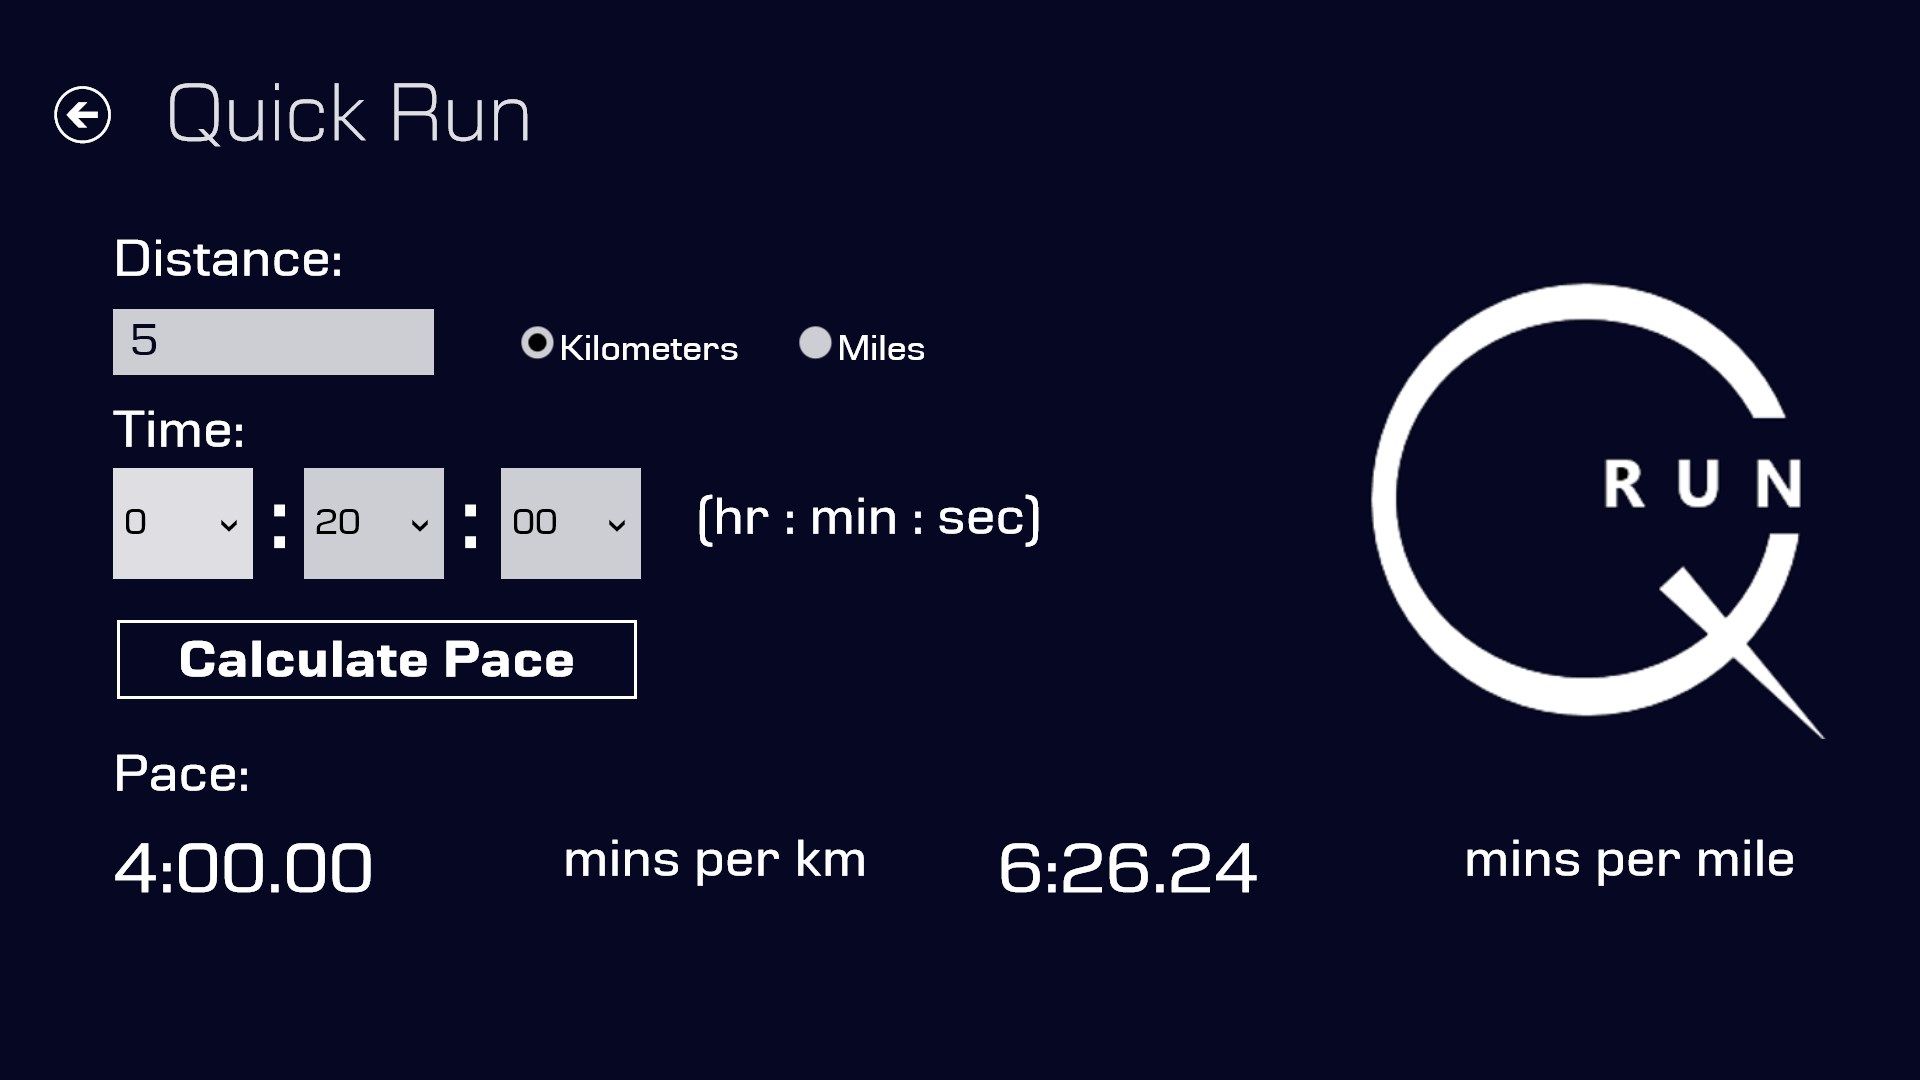 Pace Calculator - Calculate pace required to finish under a certain time